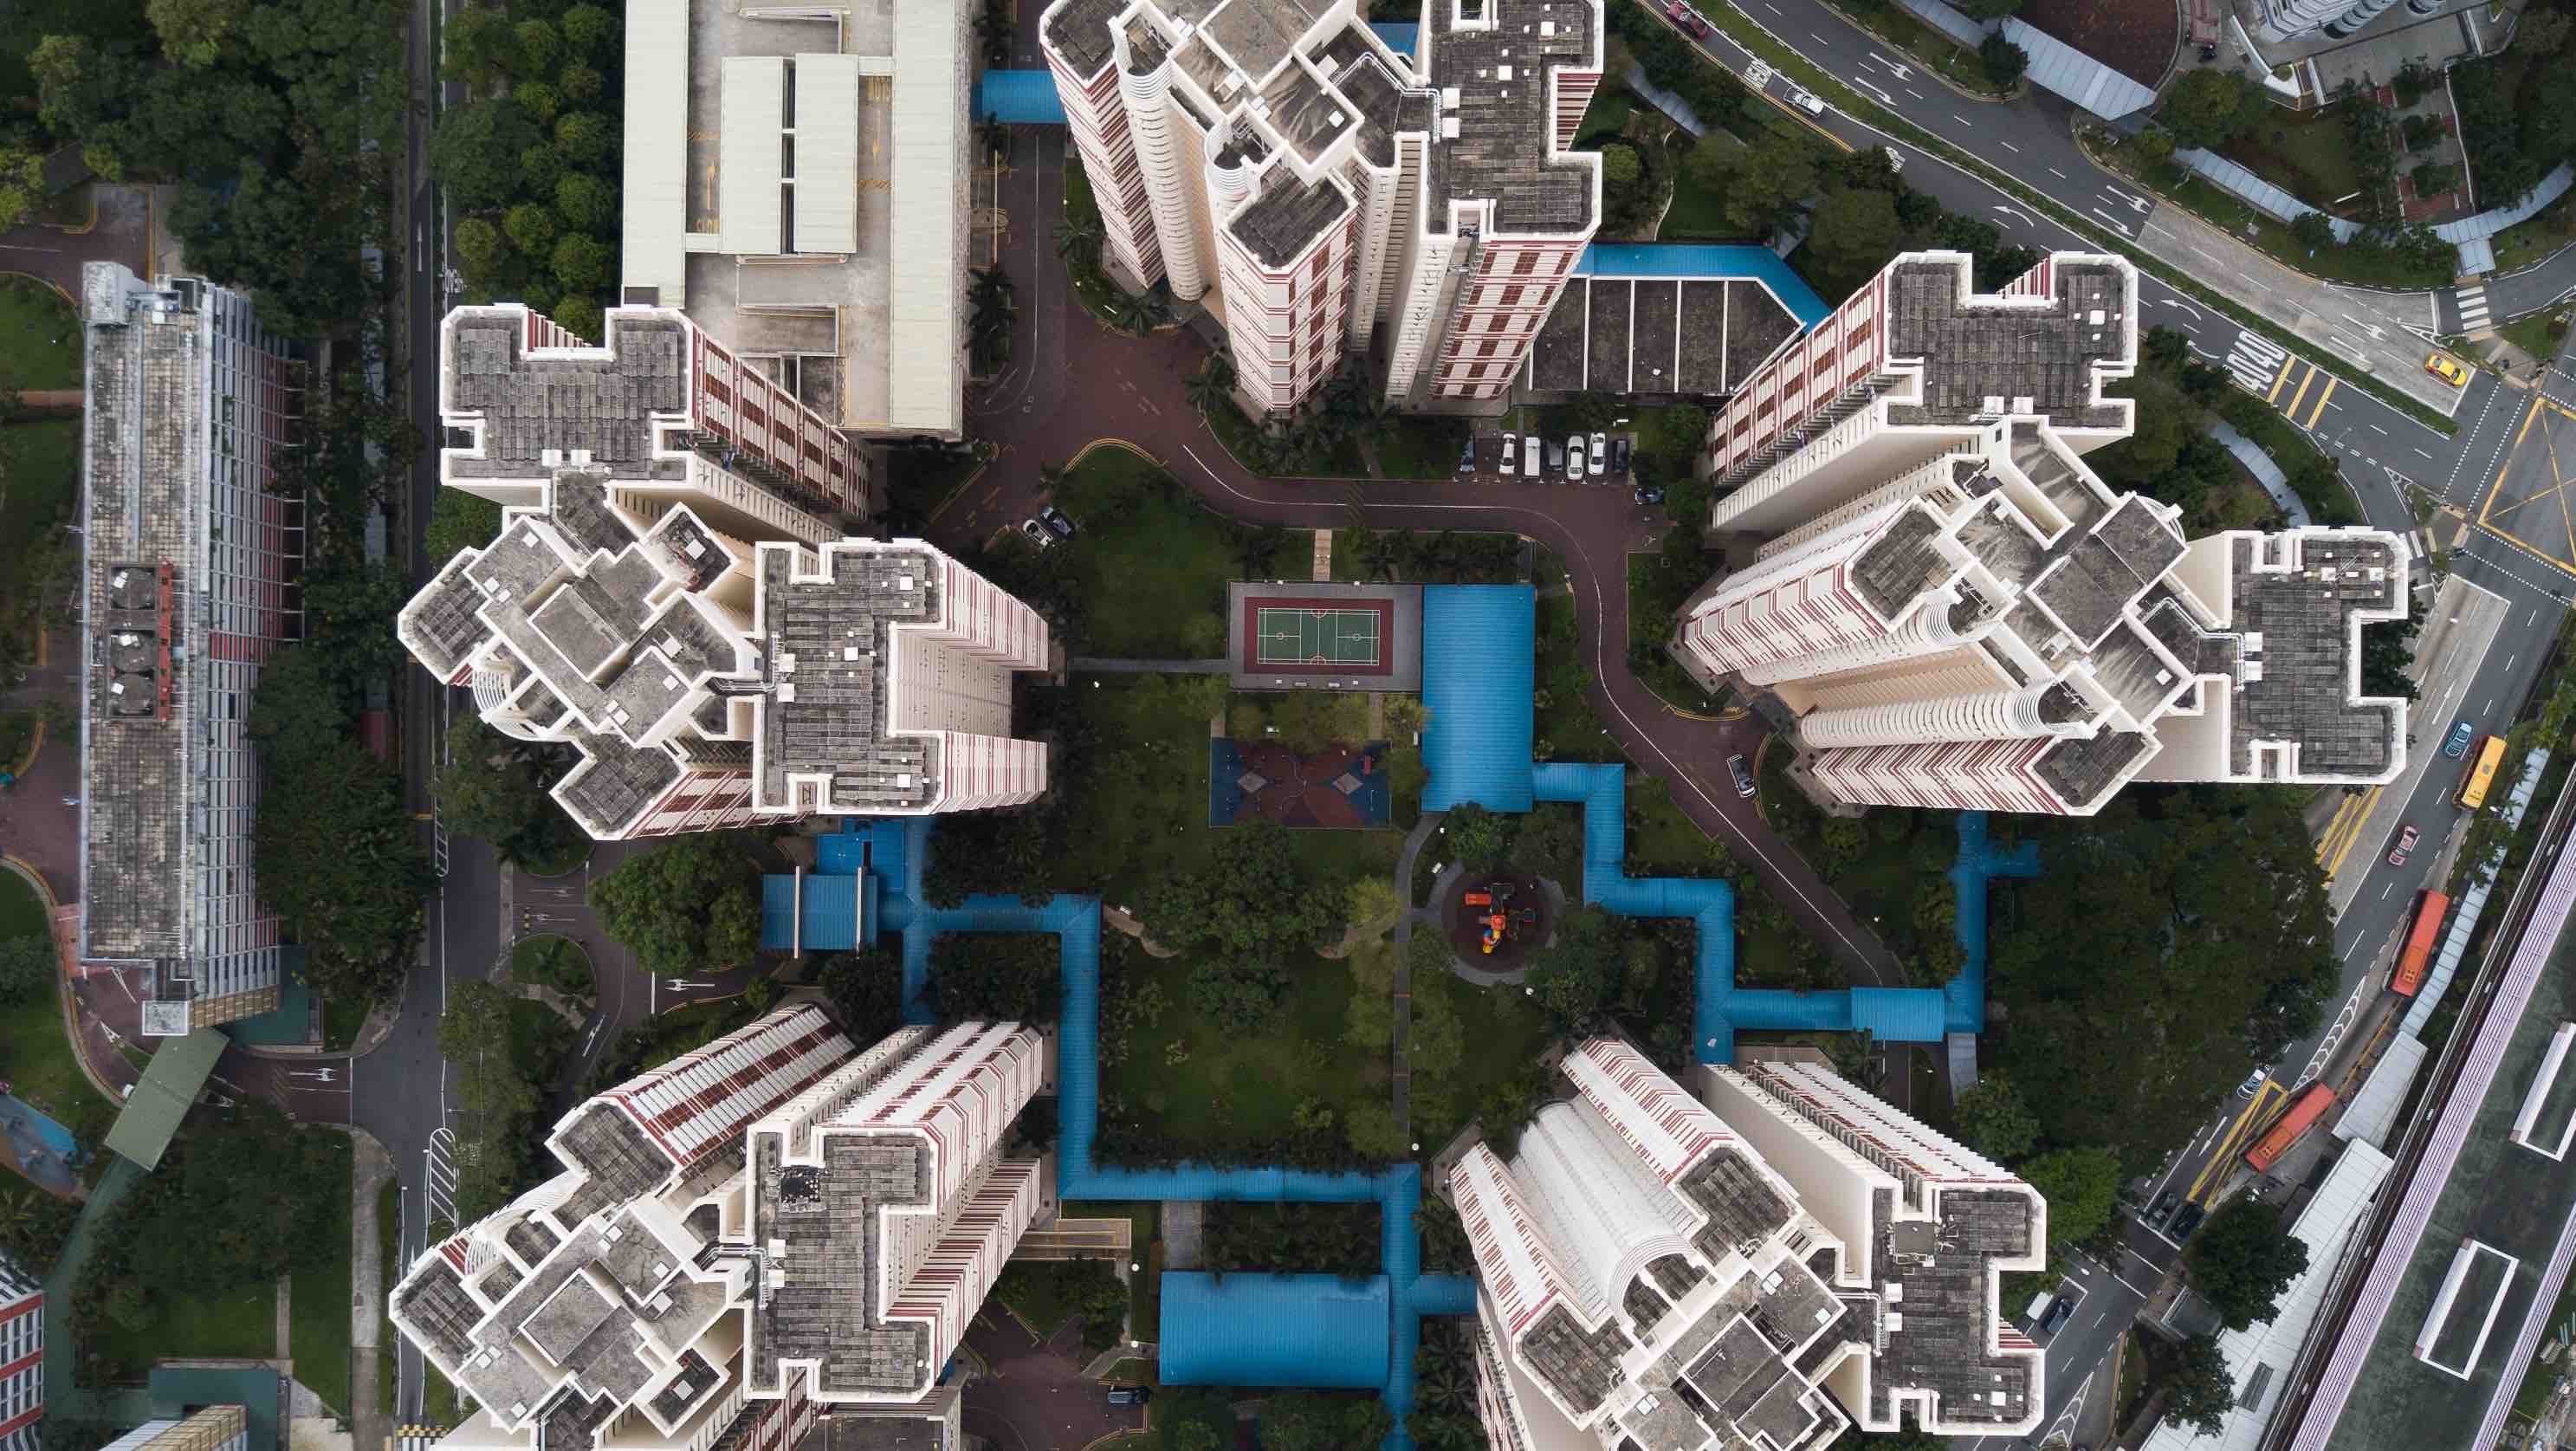 Singapore buildings from above